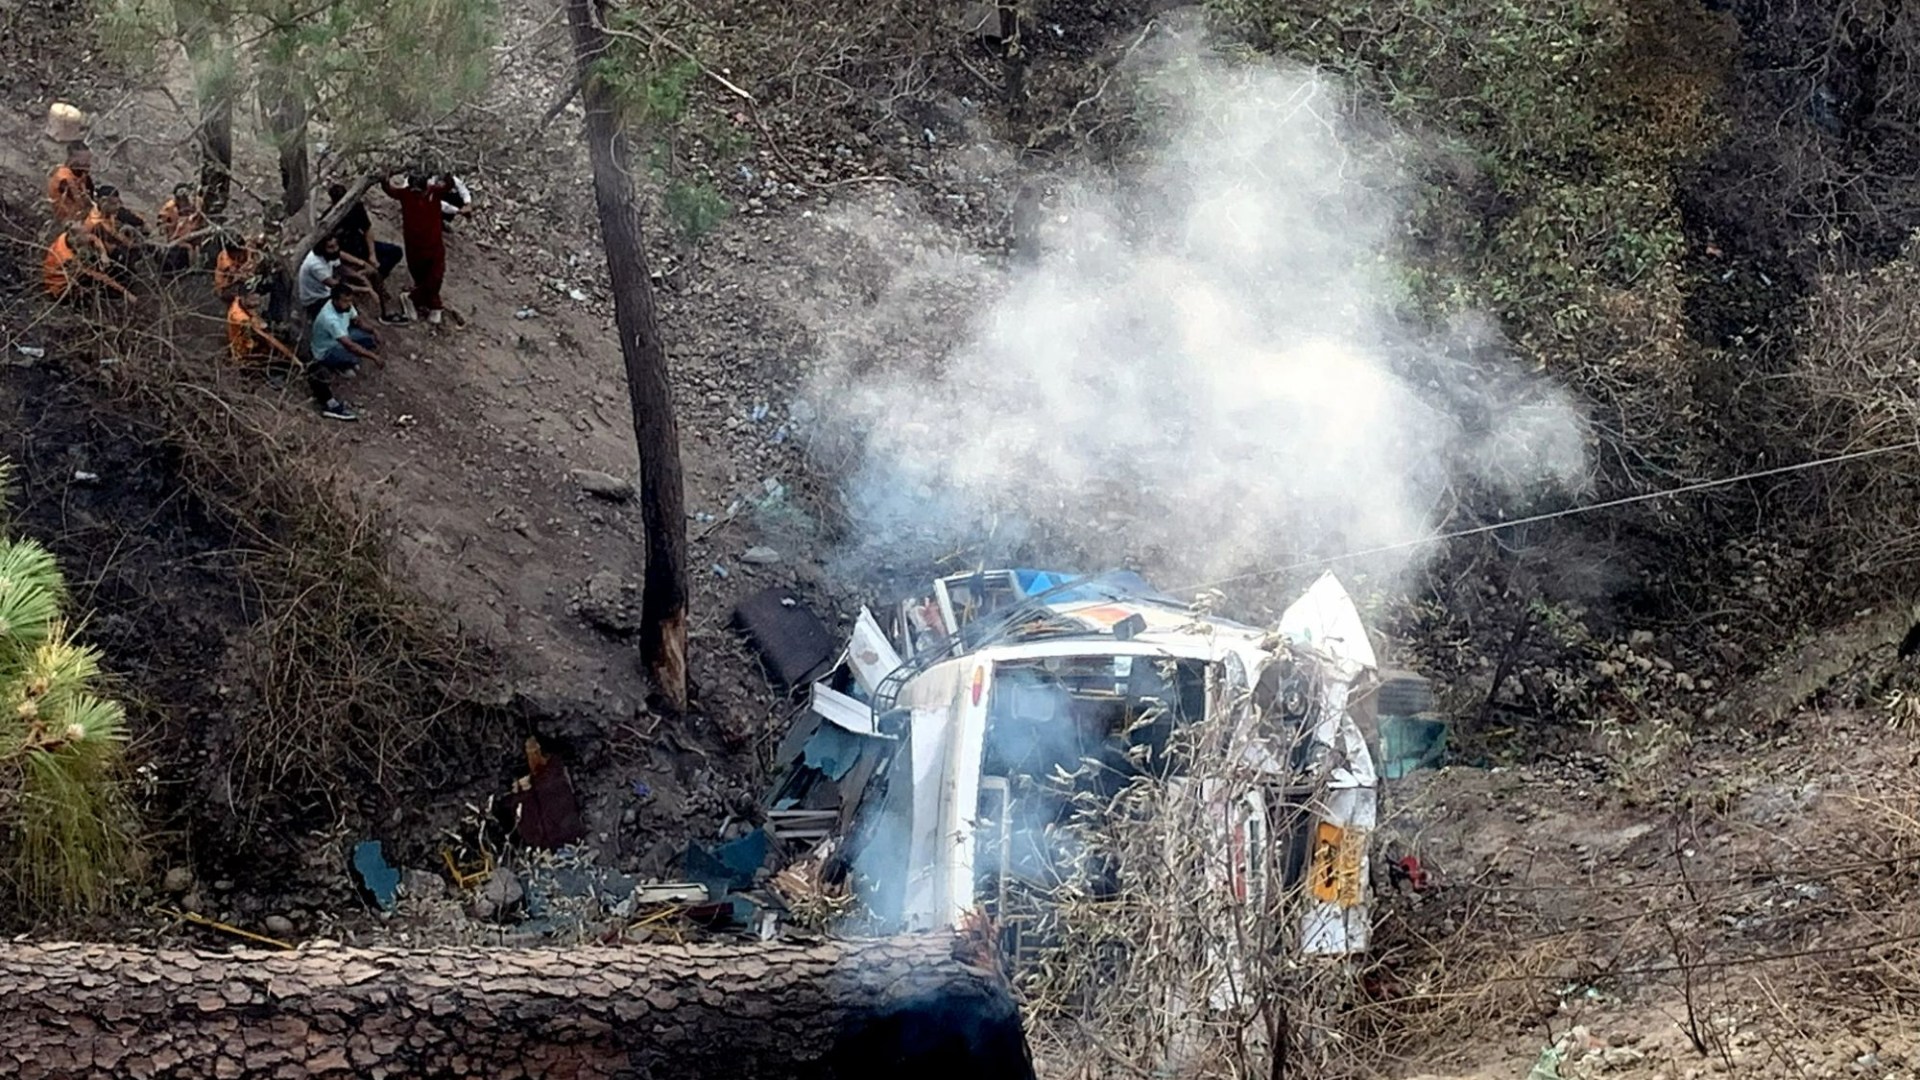 At least 22 dead and 69 injured after packed bus plummets into gorge in horror crash in India [Video]